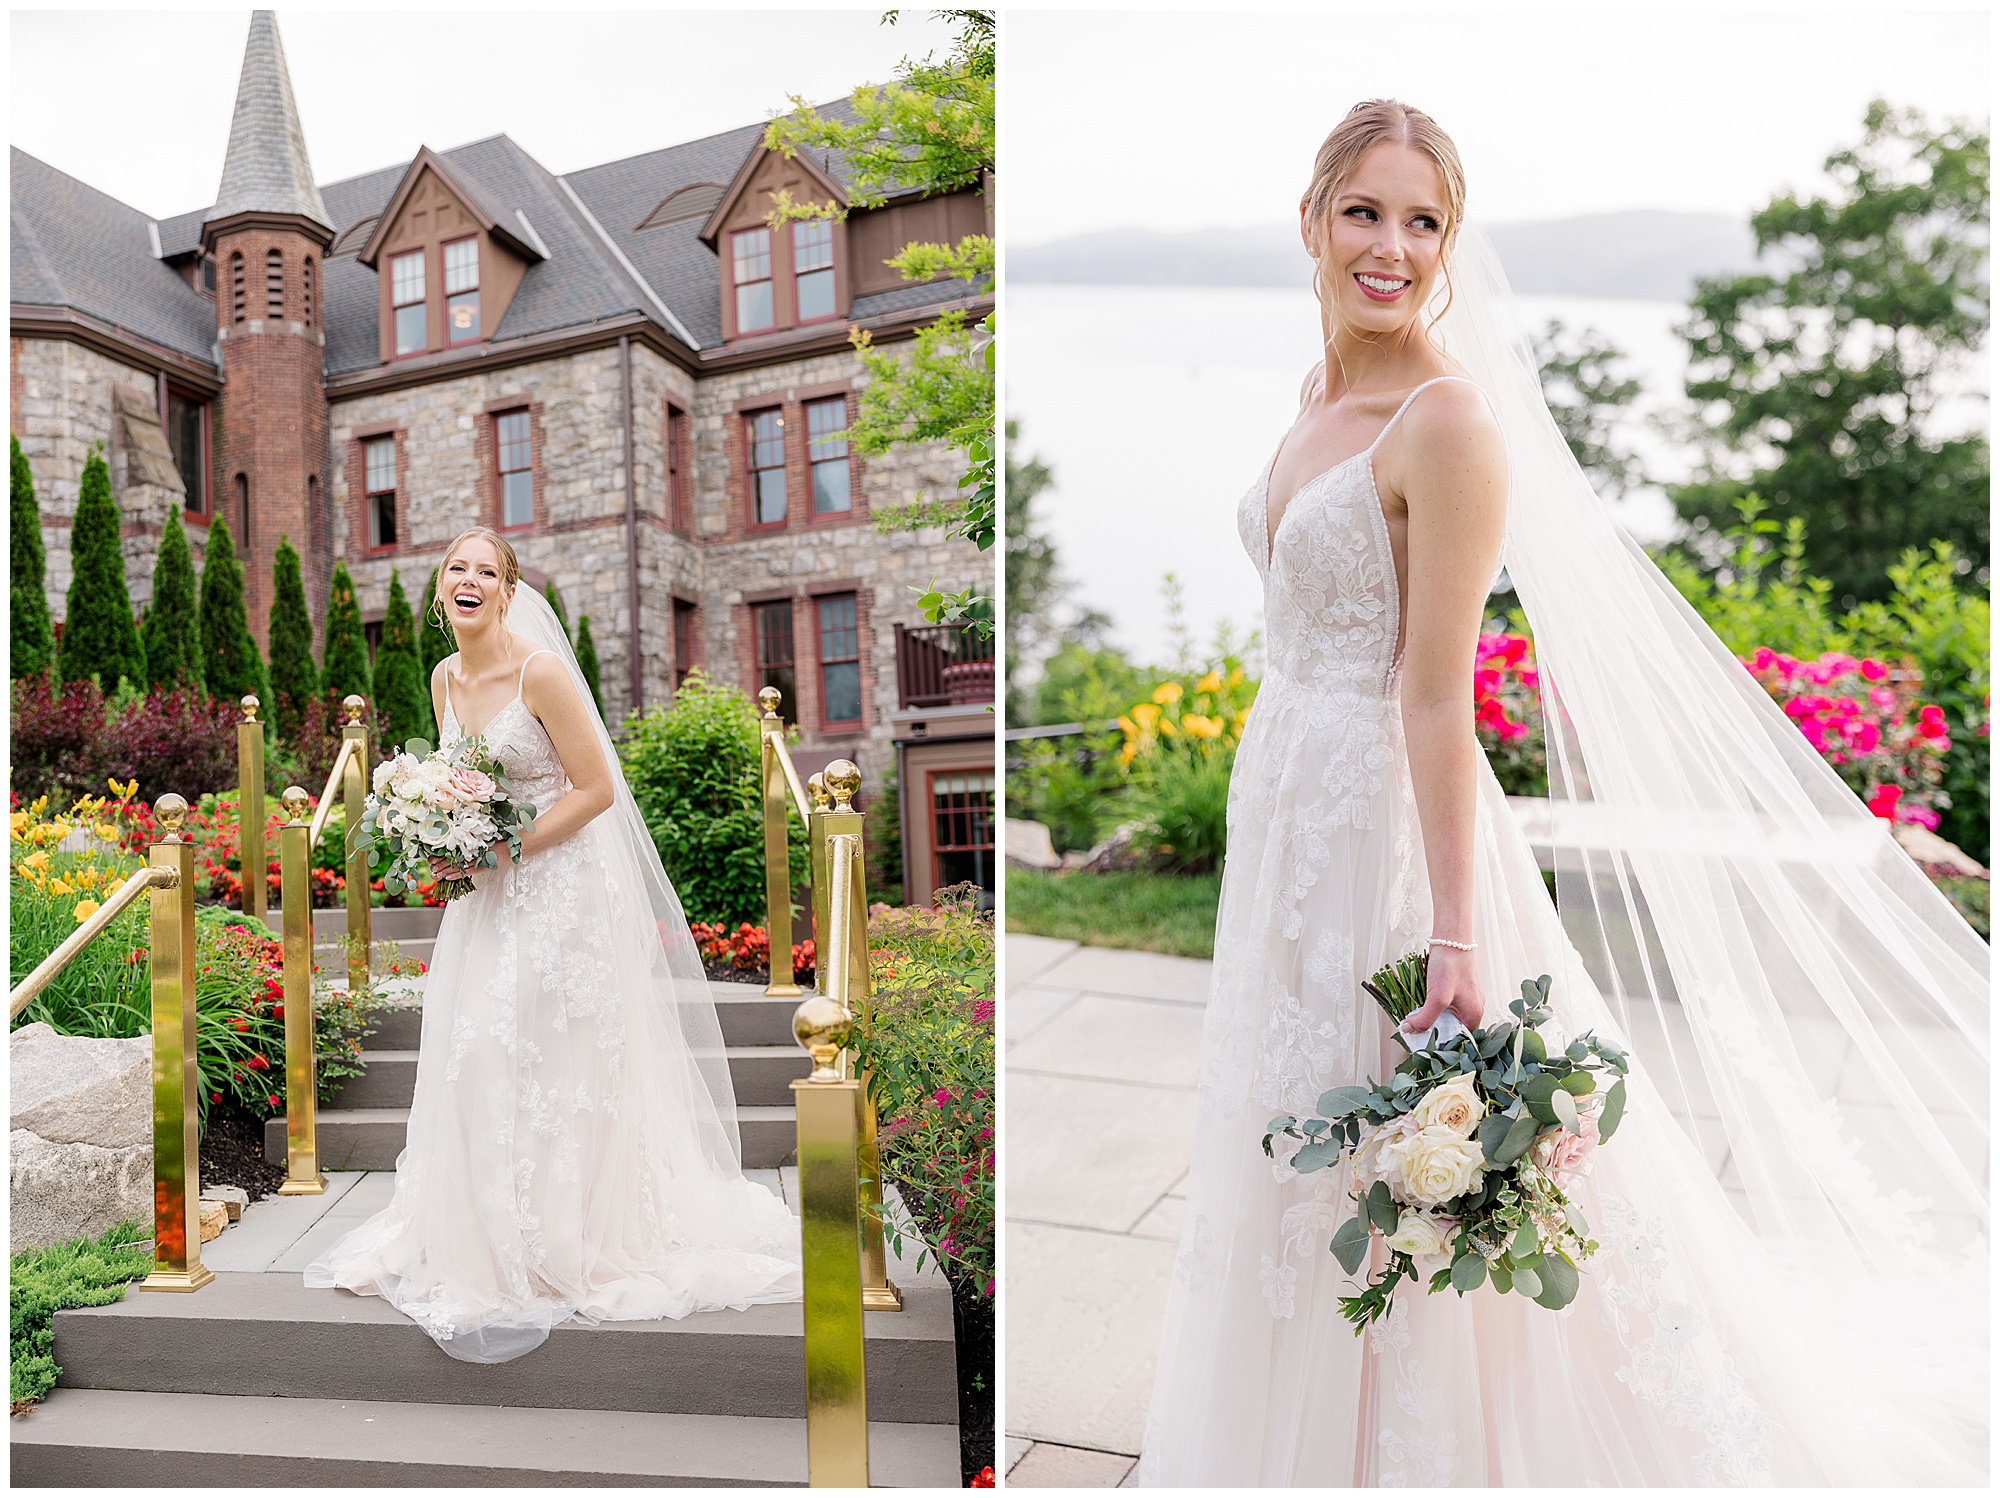 Charming venues in the Hudson Valley for your wedding